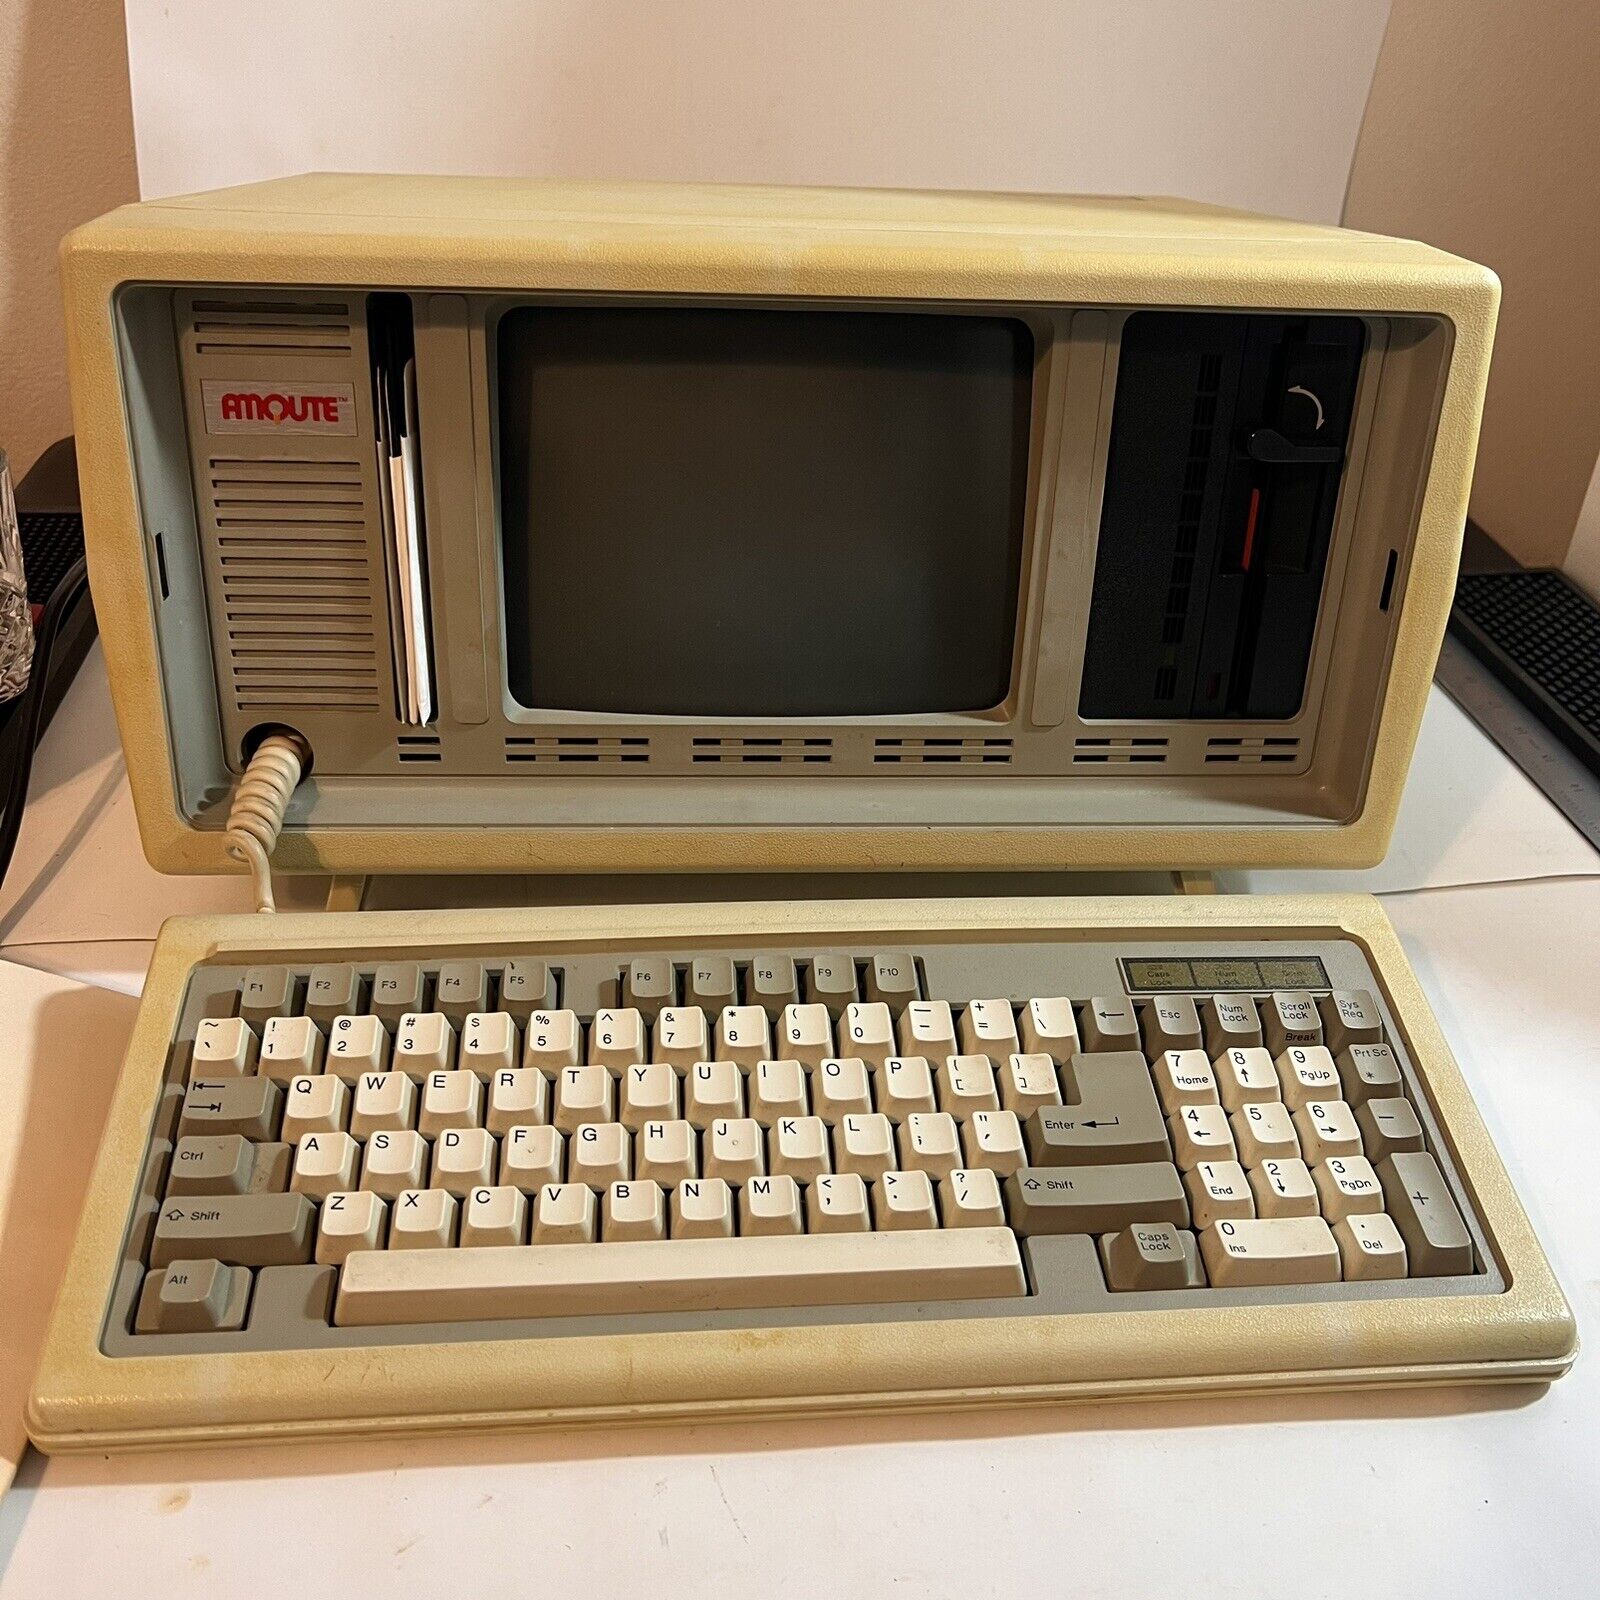 Vintage Amqute II Extremely Rare Original Box Computer - Needs Work